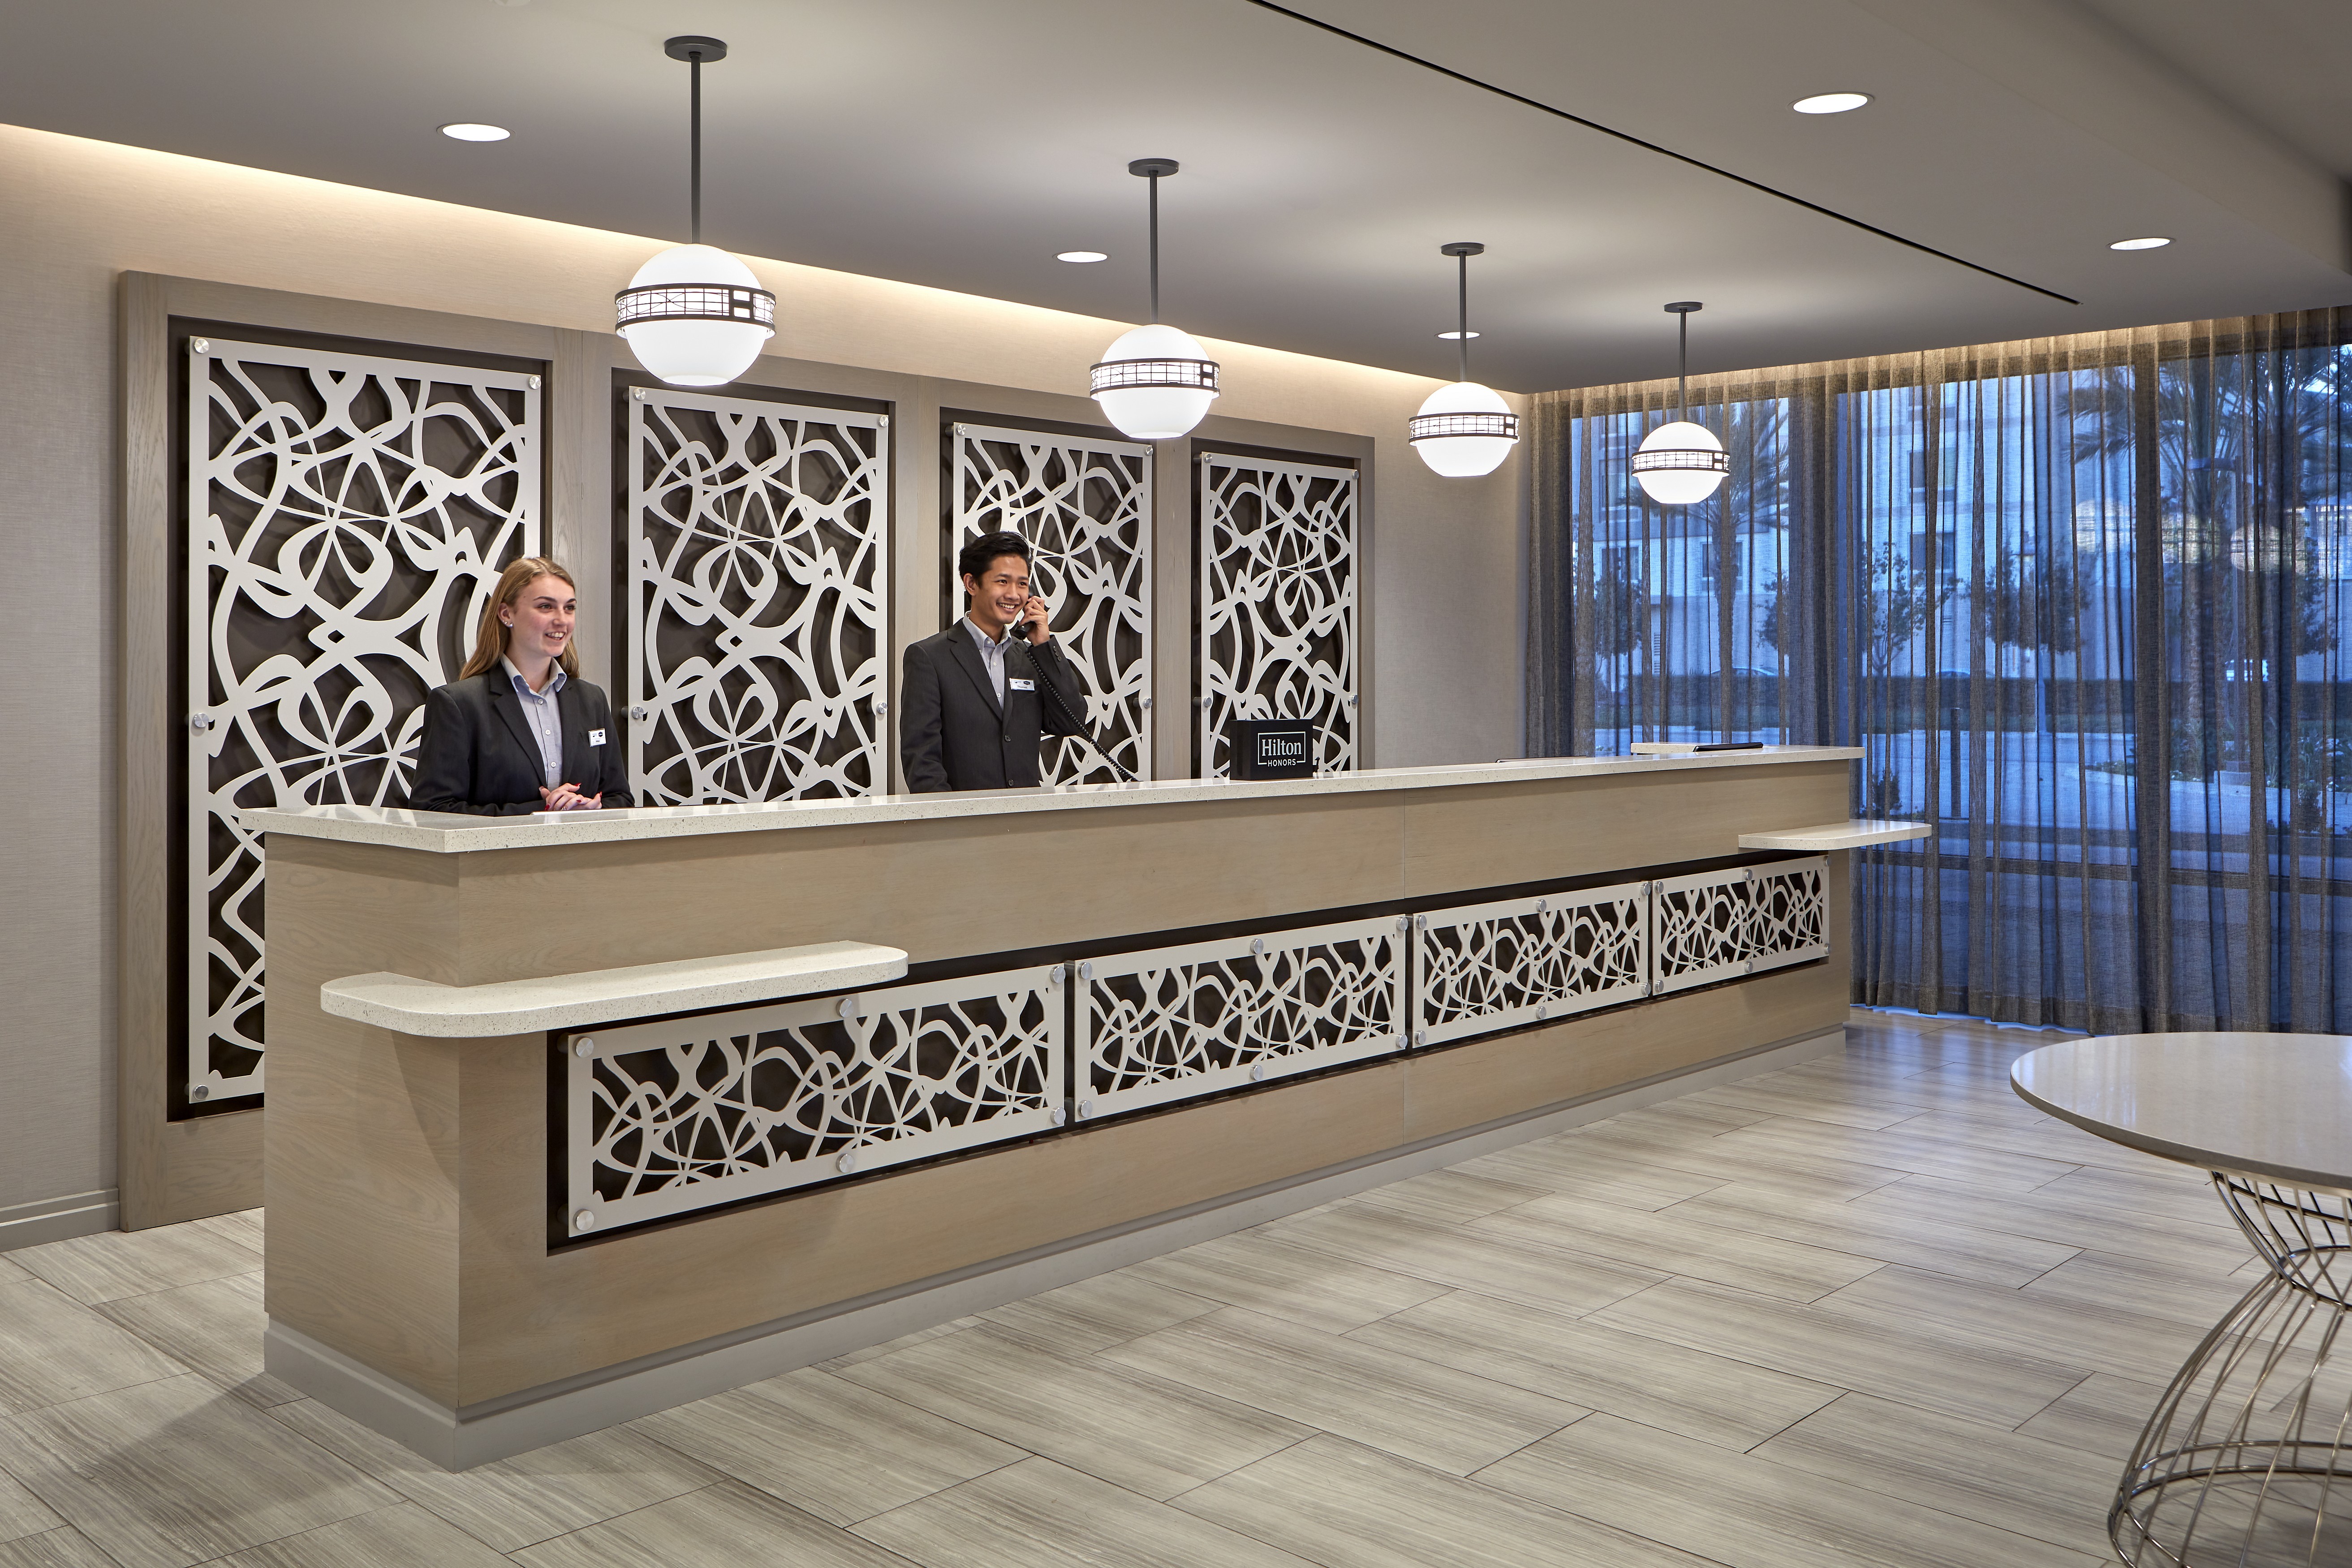 Front Desk Reception Area with Two Front Desk Staff Members